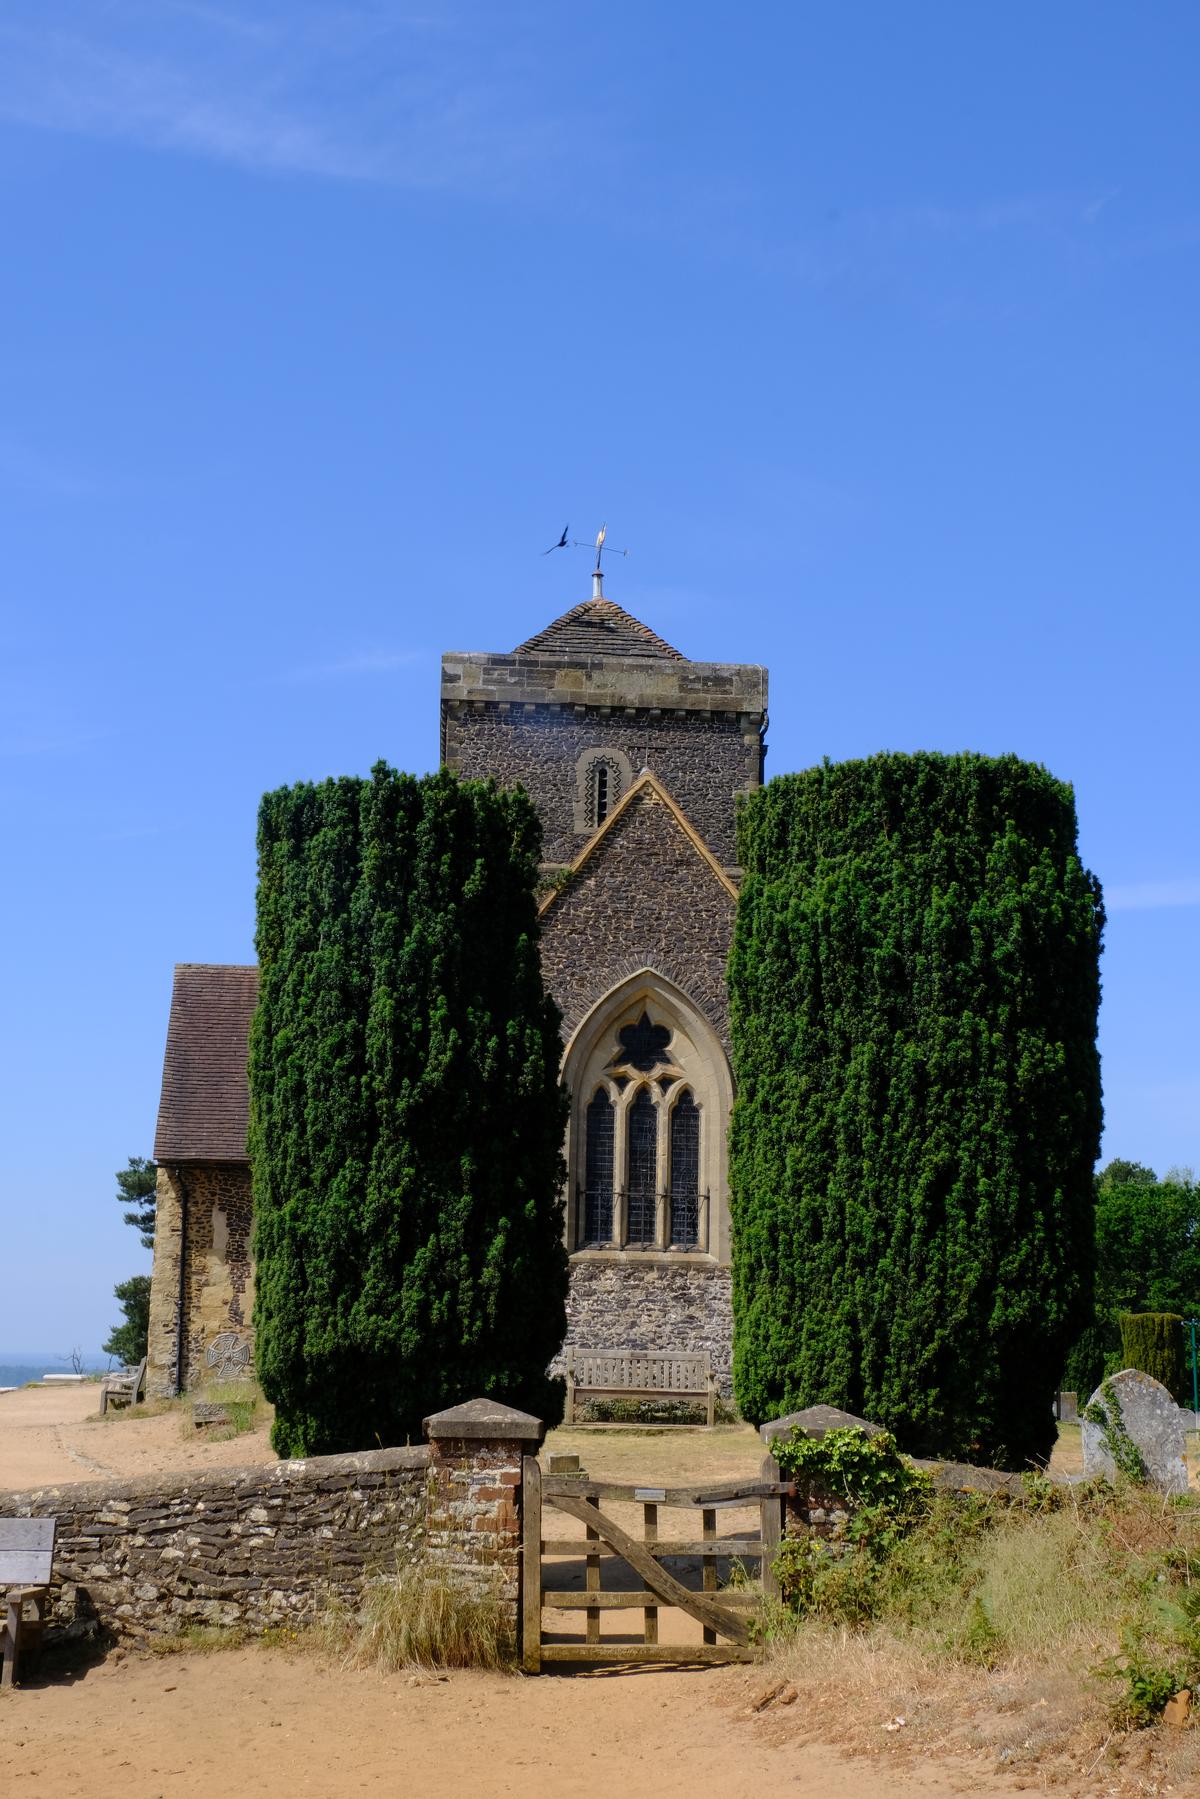 A hilltop church and two great green bushes